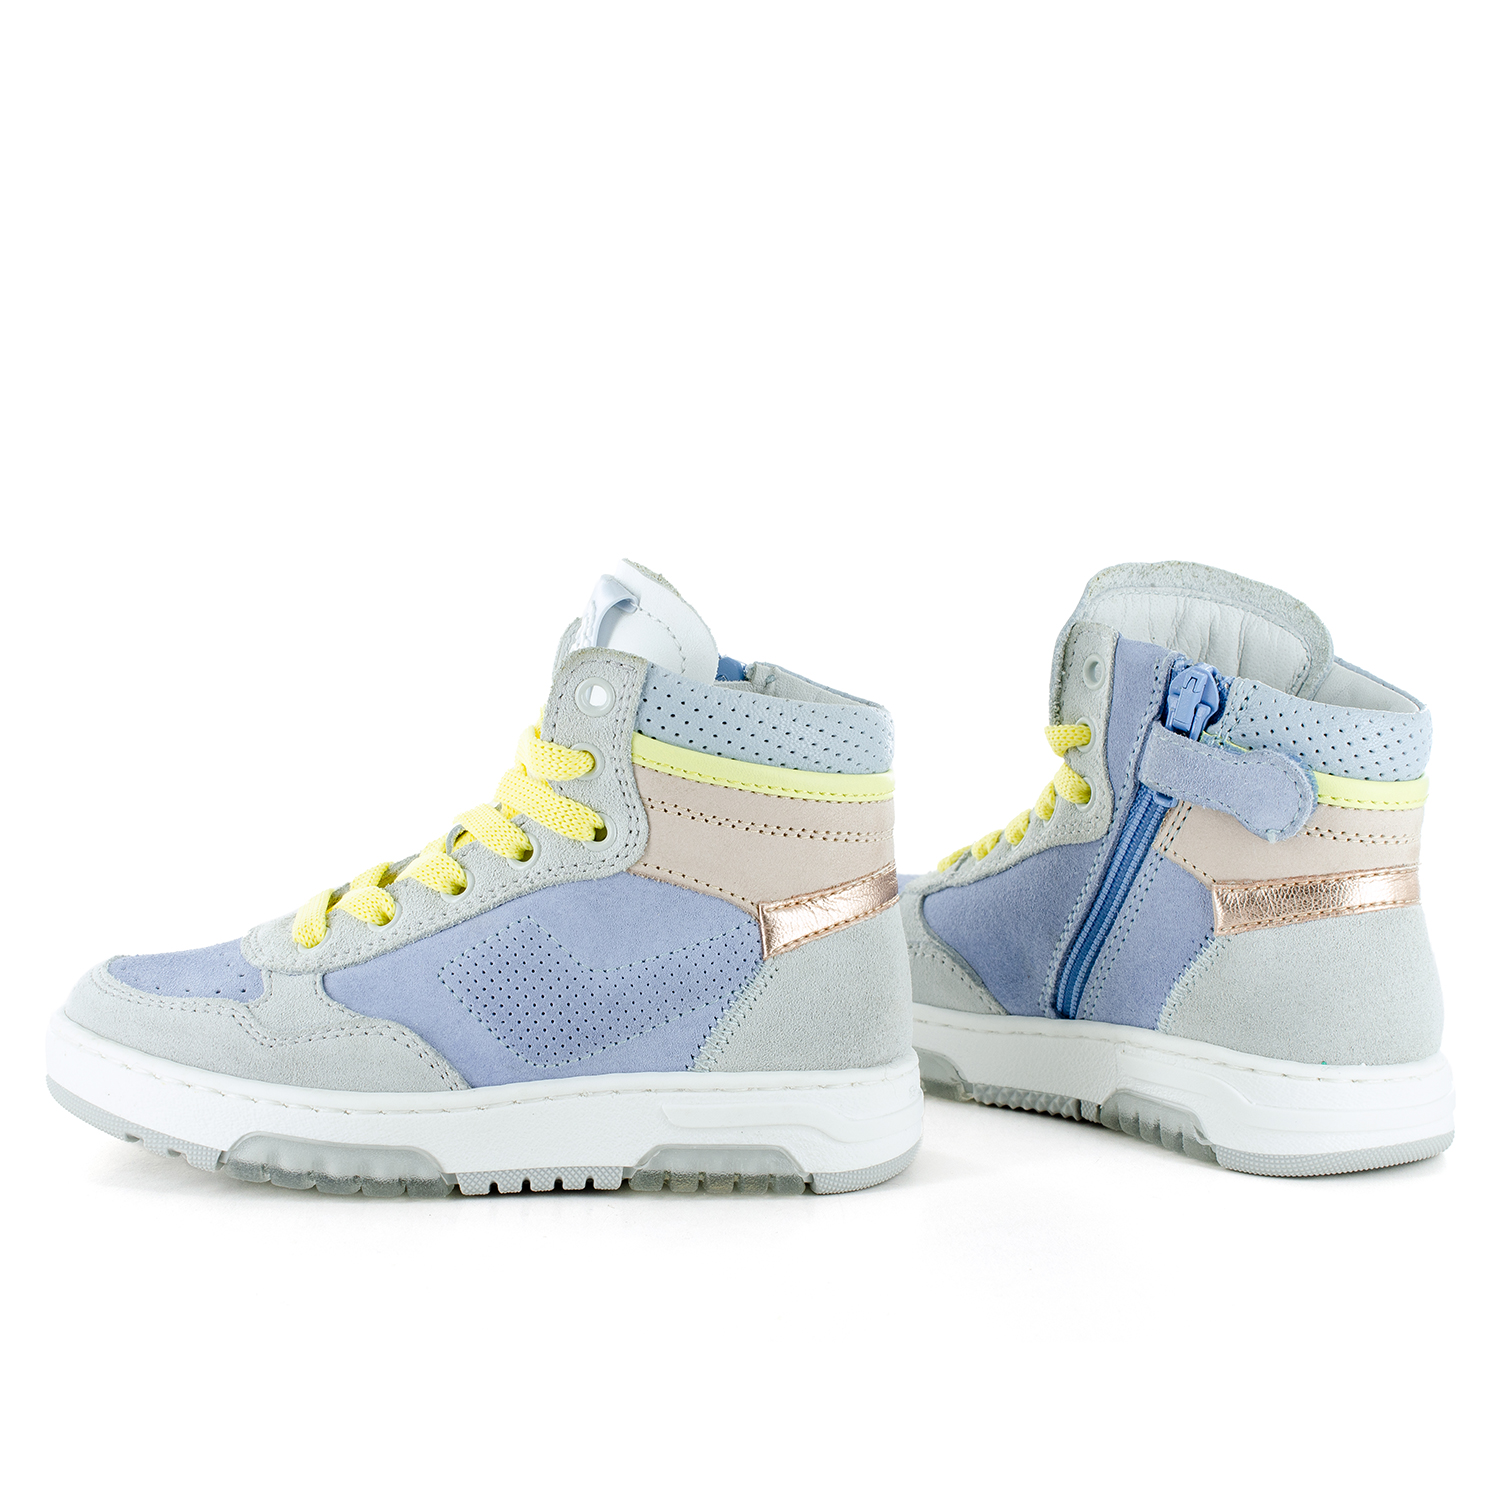 RICET crs - calf ice-blue + off white